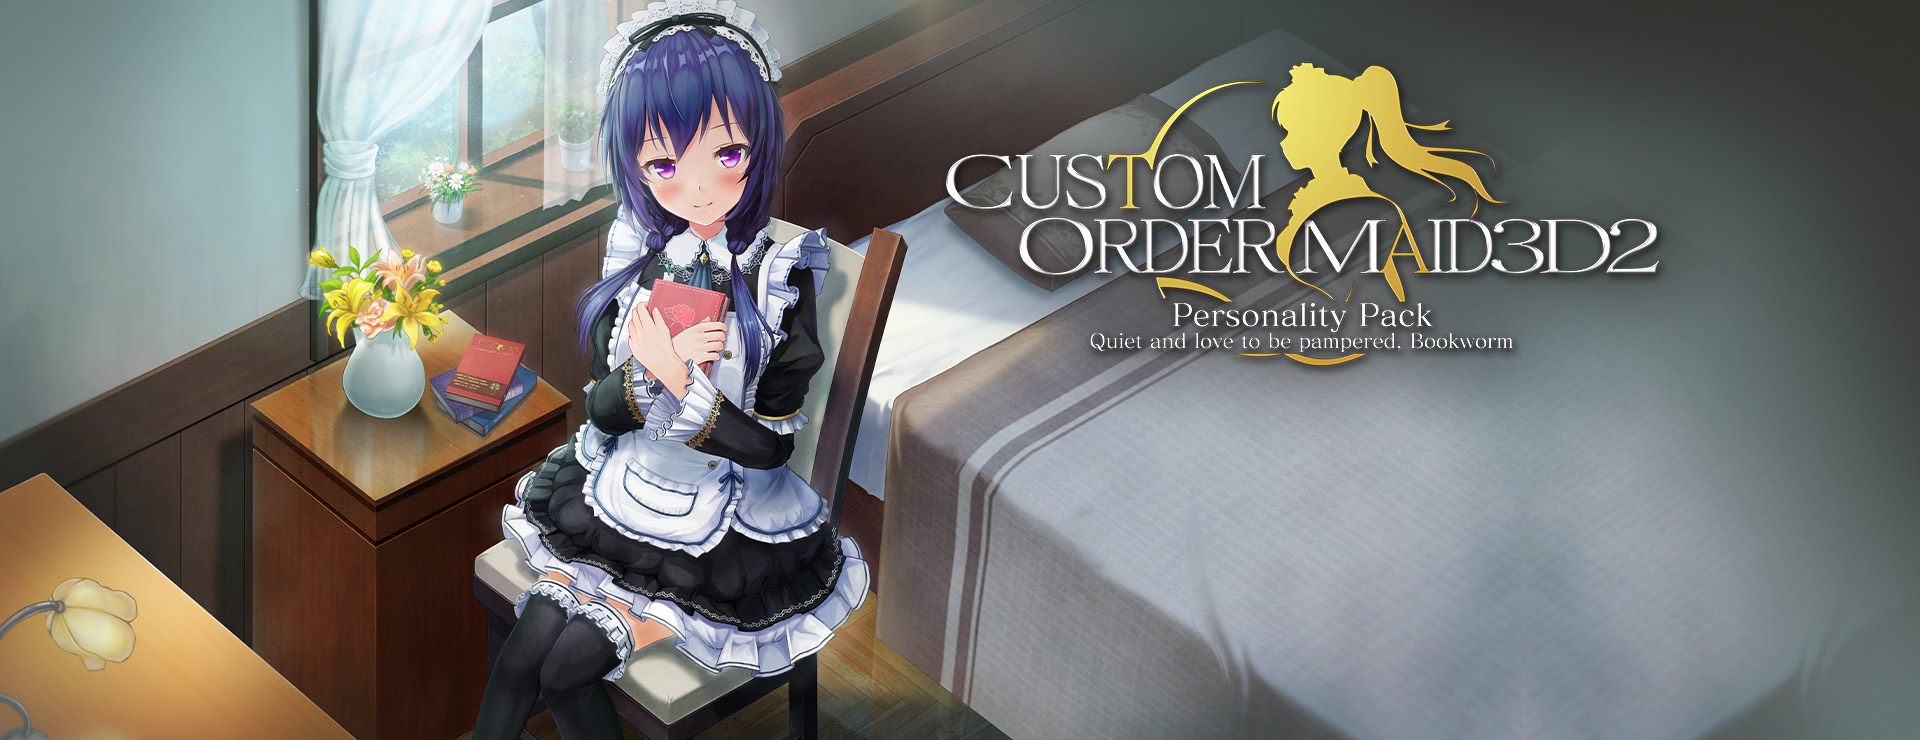 Custom Order Maid 3D2 - Quiet and Love to be Pampered Bookworm DLC - シミュレーション ゲーム